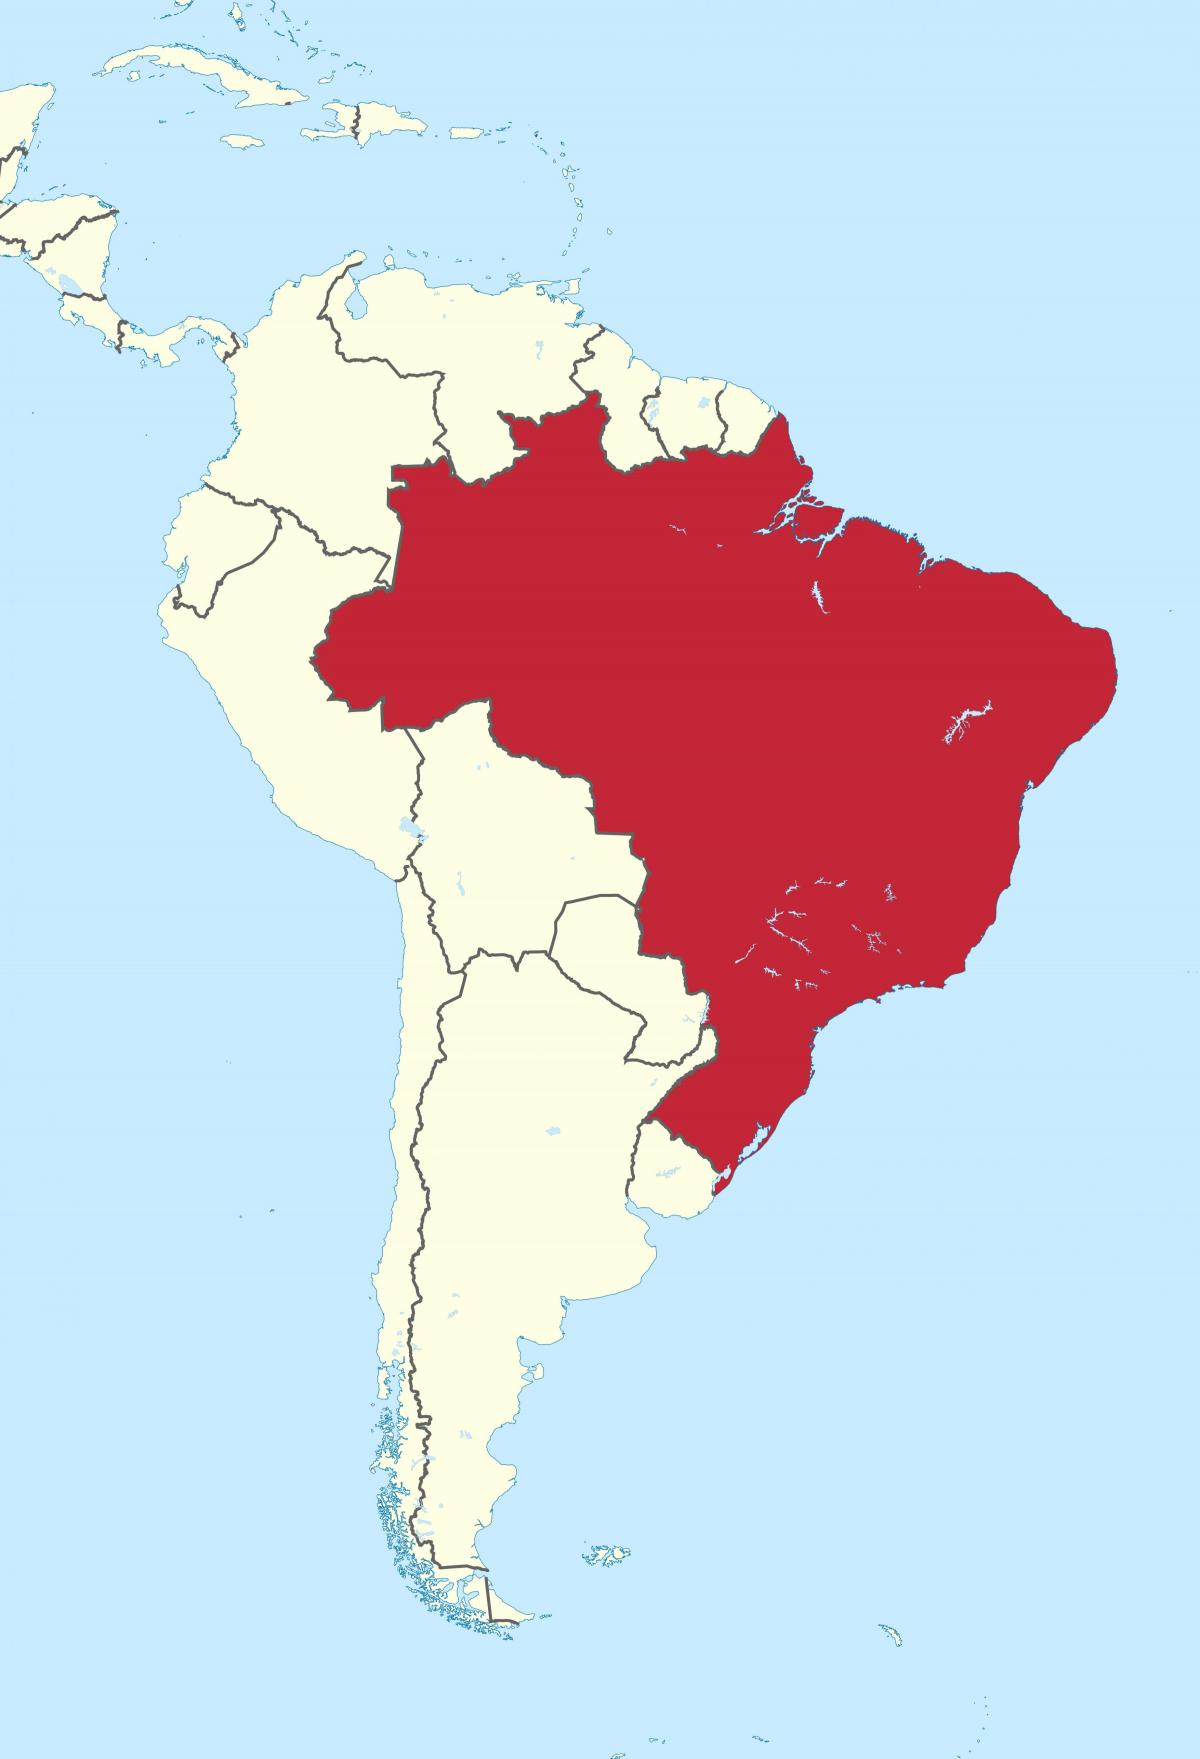 Brazil location on the Americas map